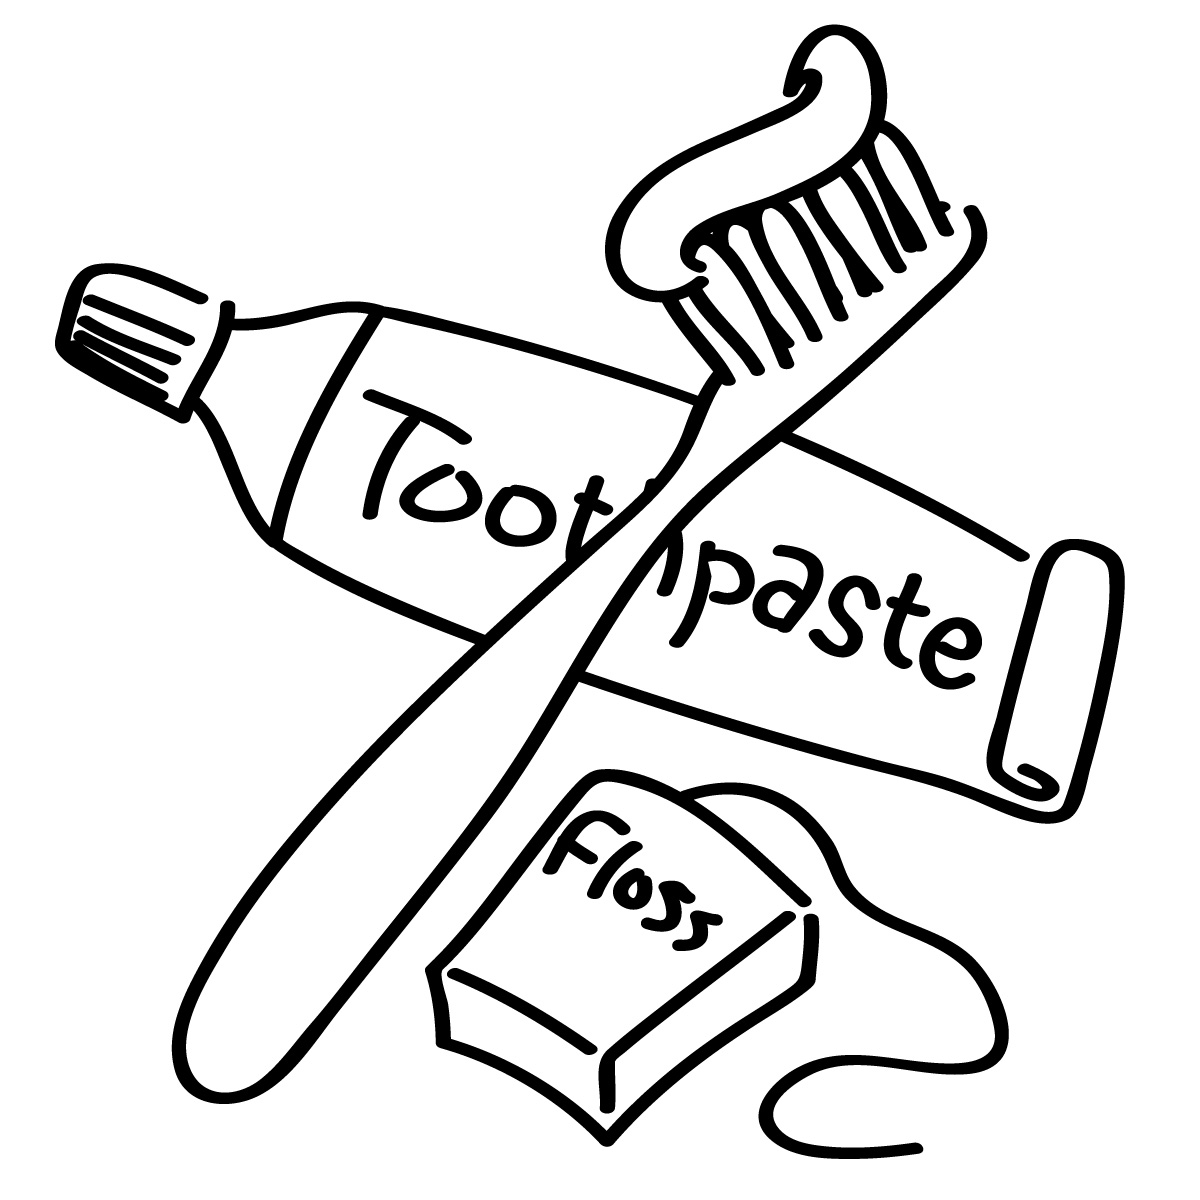 Clean Up Toys Clipart